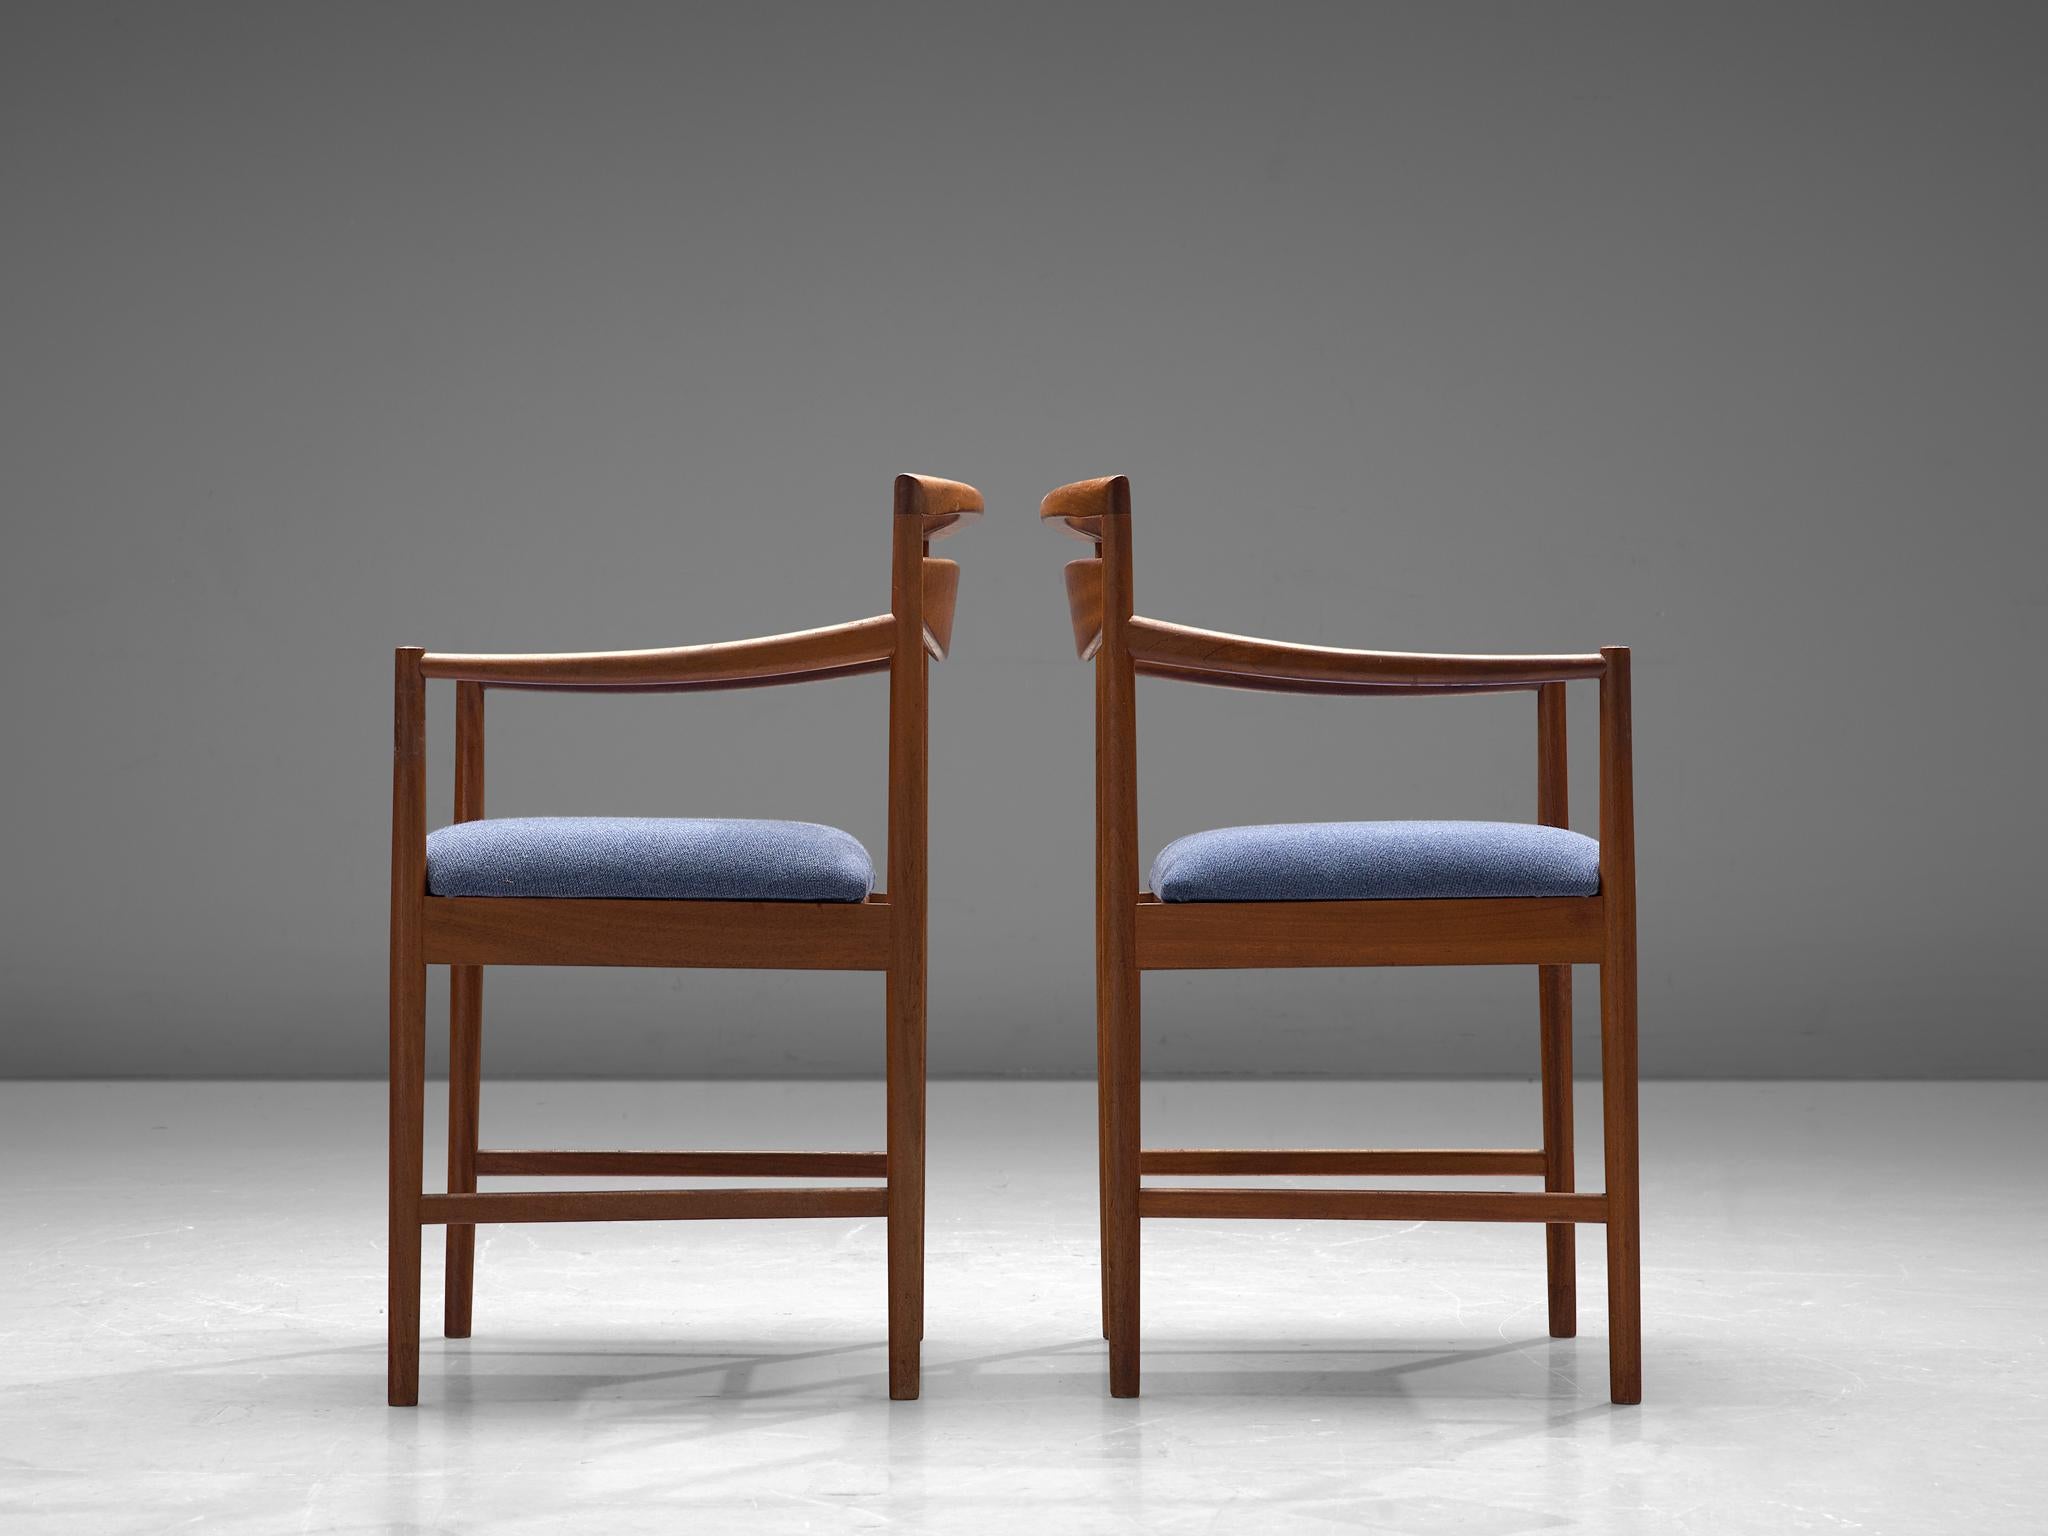 Mid-20th Century Danish Set of Eight Chairs in Teak and Blue Upholstery